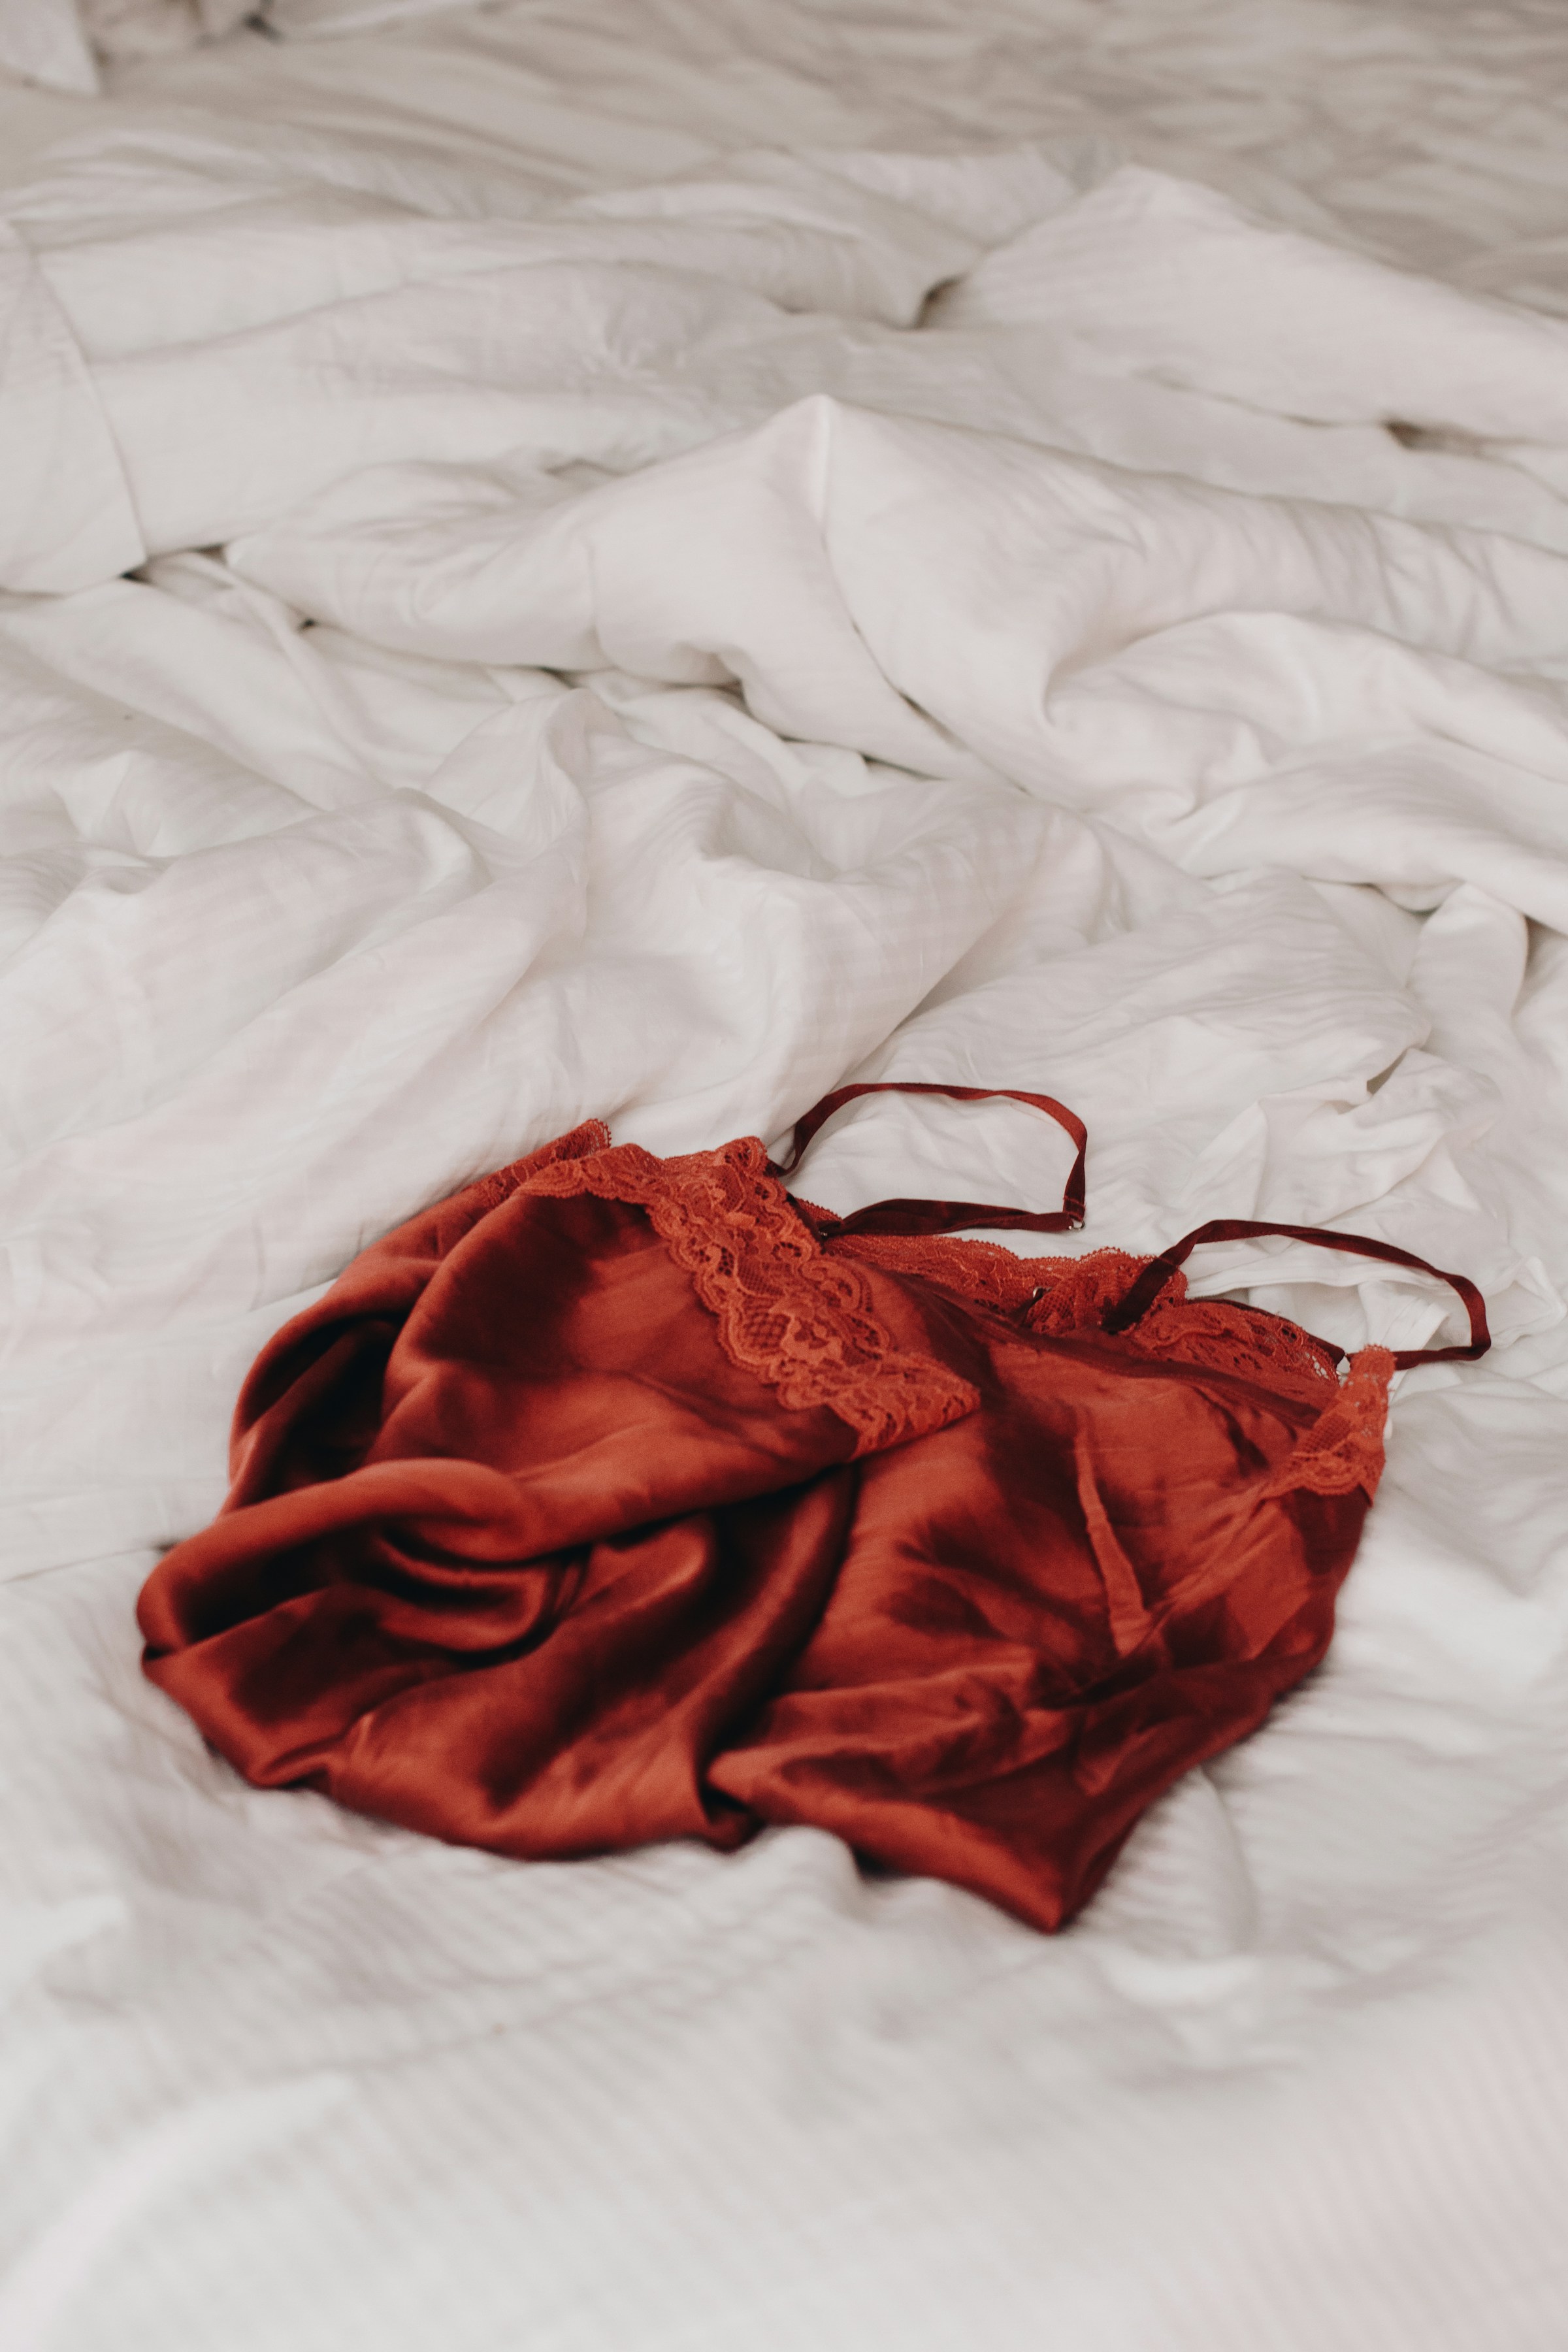 Red laced lingerie lying on white linen sheets | Source: Unsplash